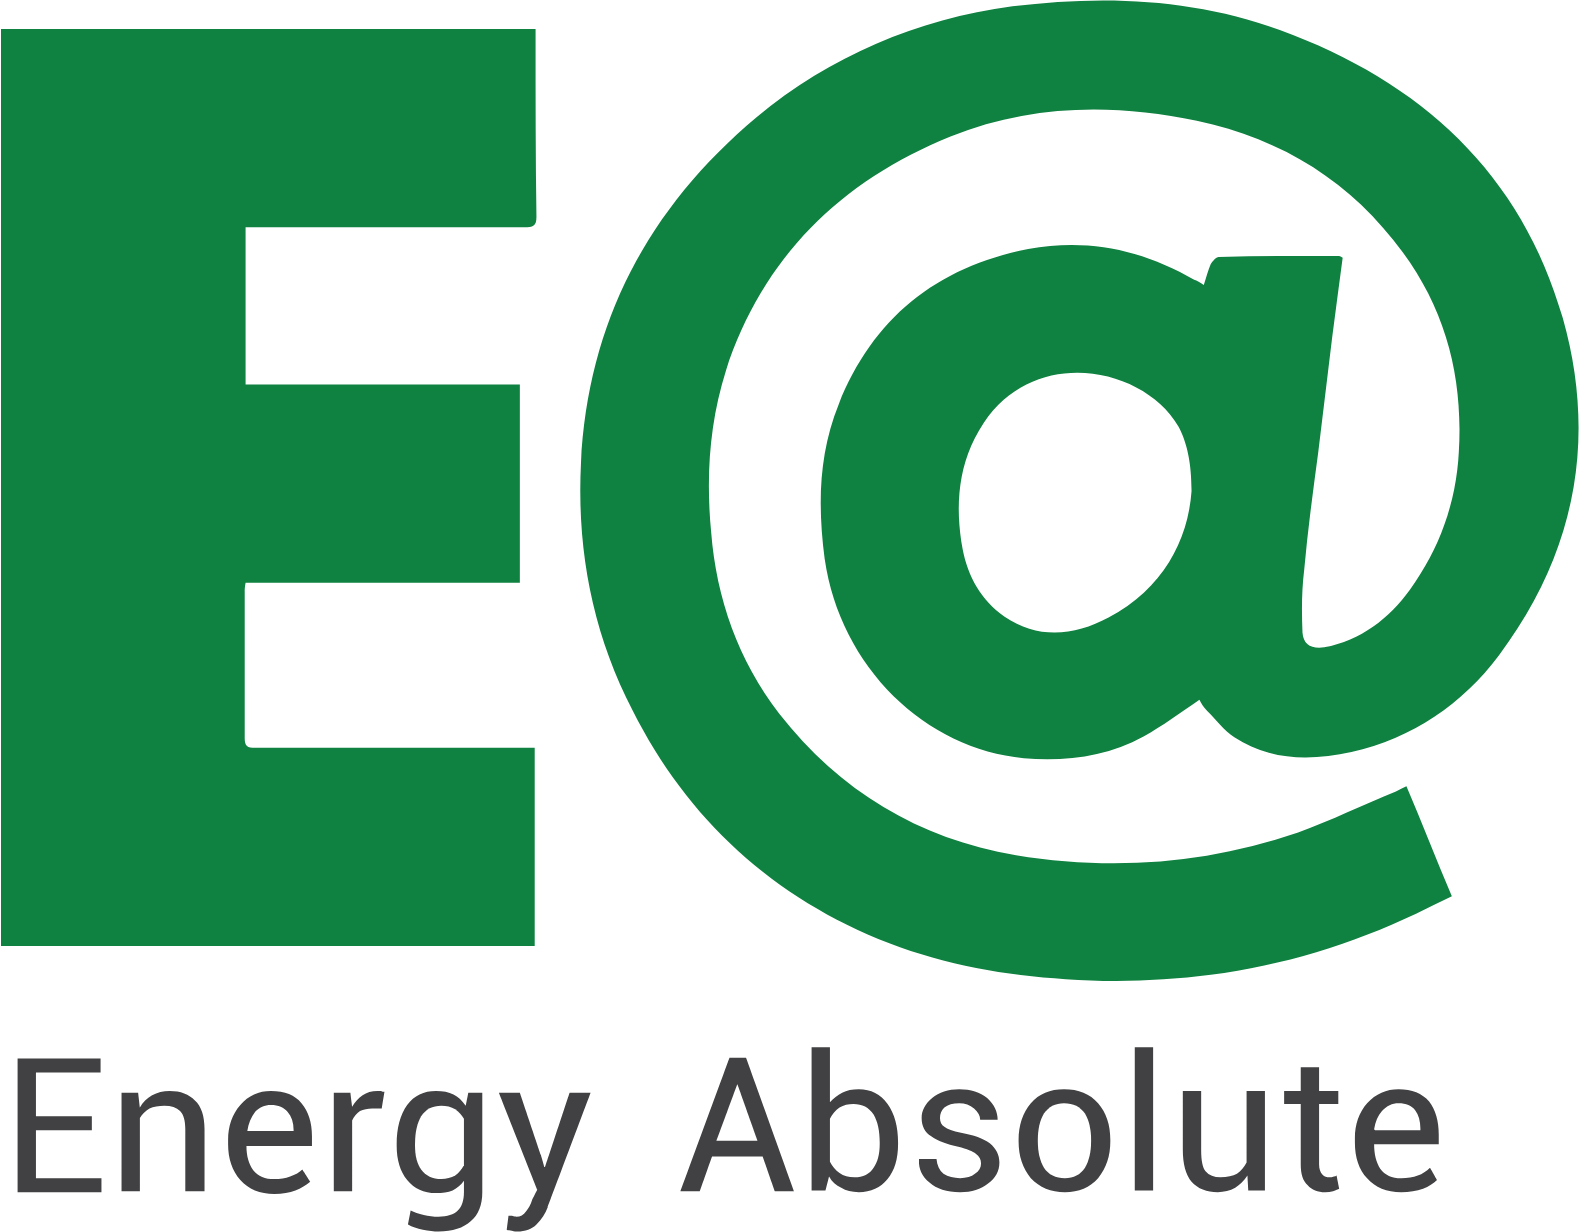 Energy Absolute logo large (transparent PNG)